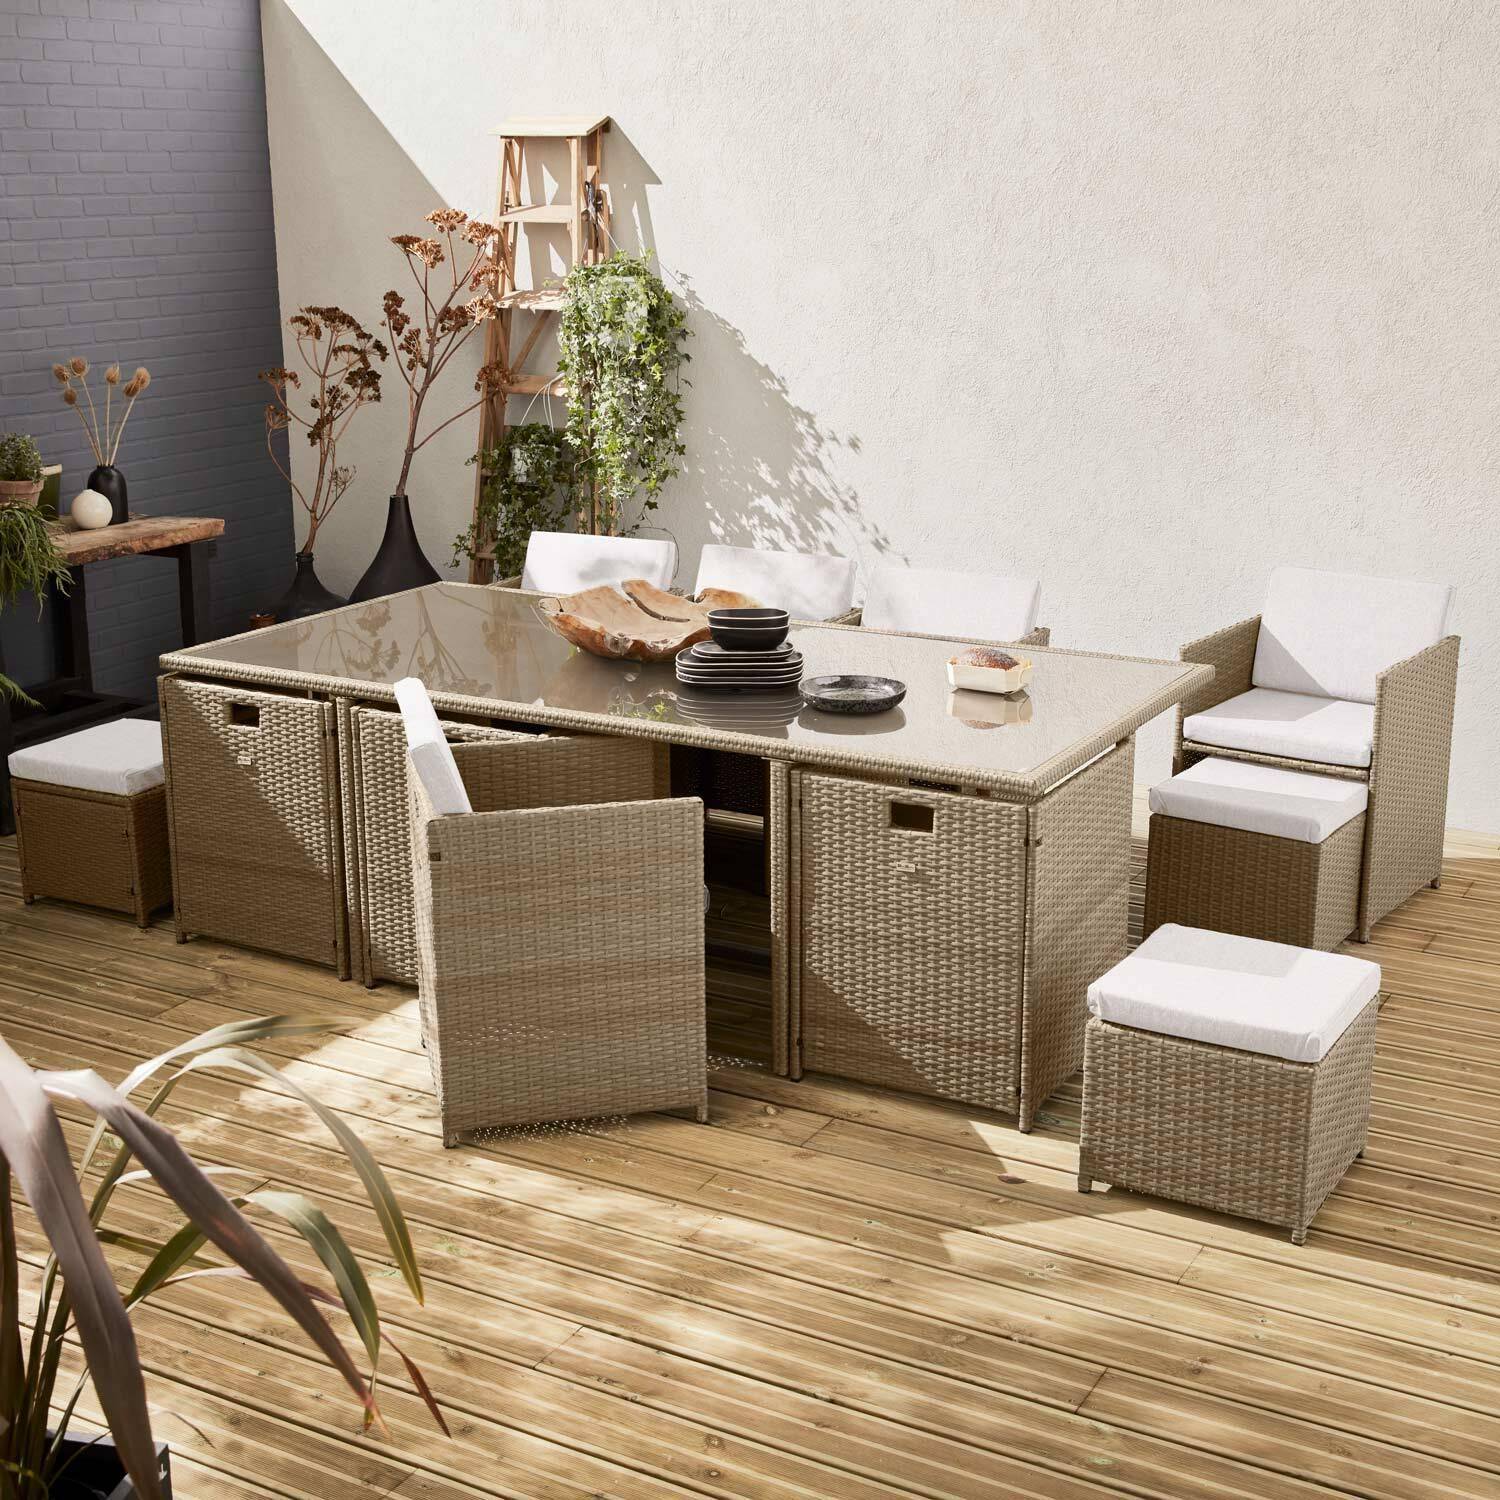 8 to 12-seater rattan cube table set - table, 8 armchairs, 4 footstools - Vabo 12 - Natural rattan, Beige cushions Photo1